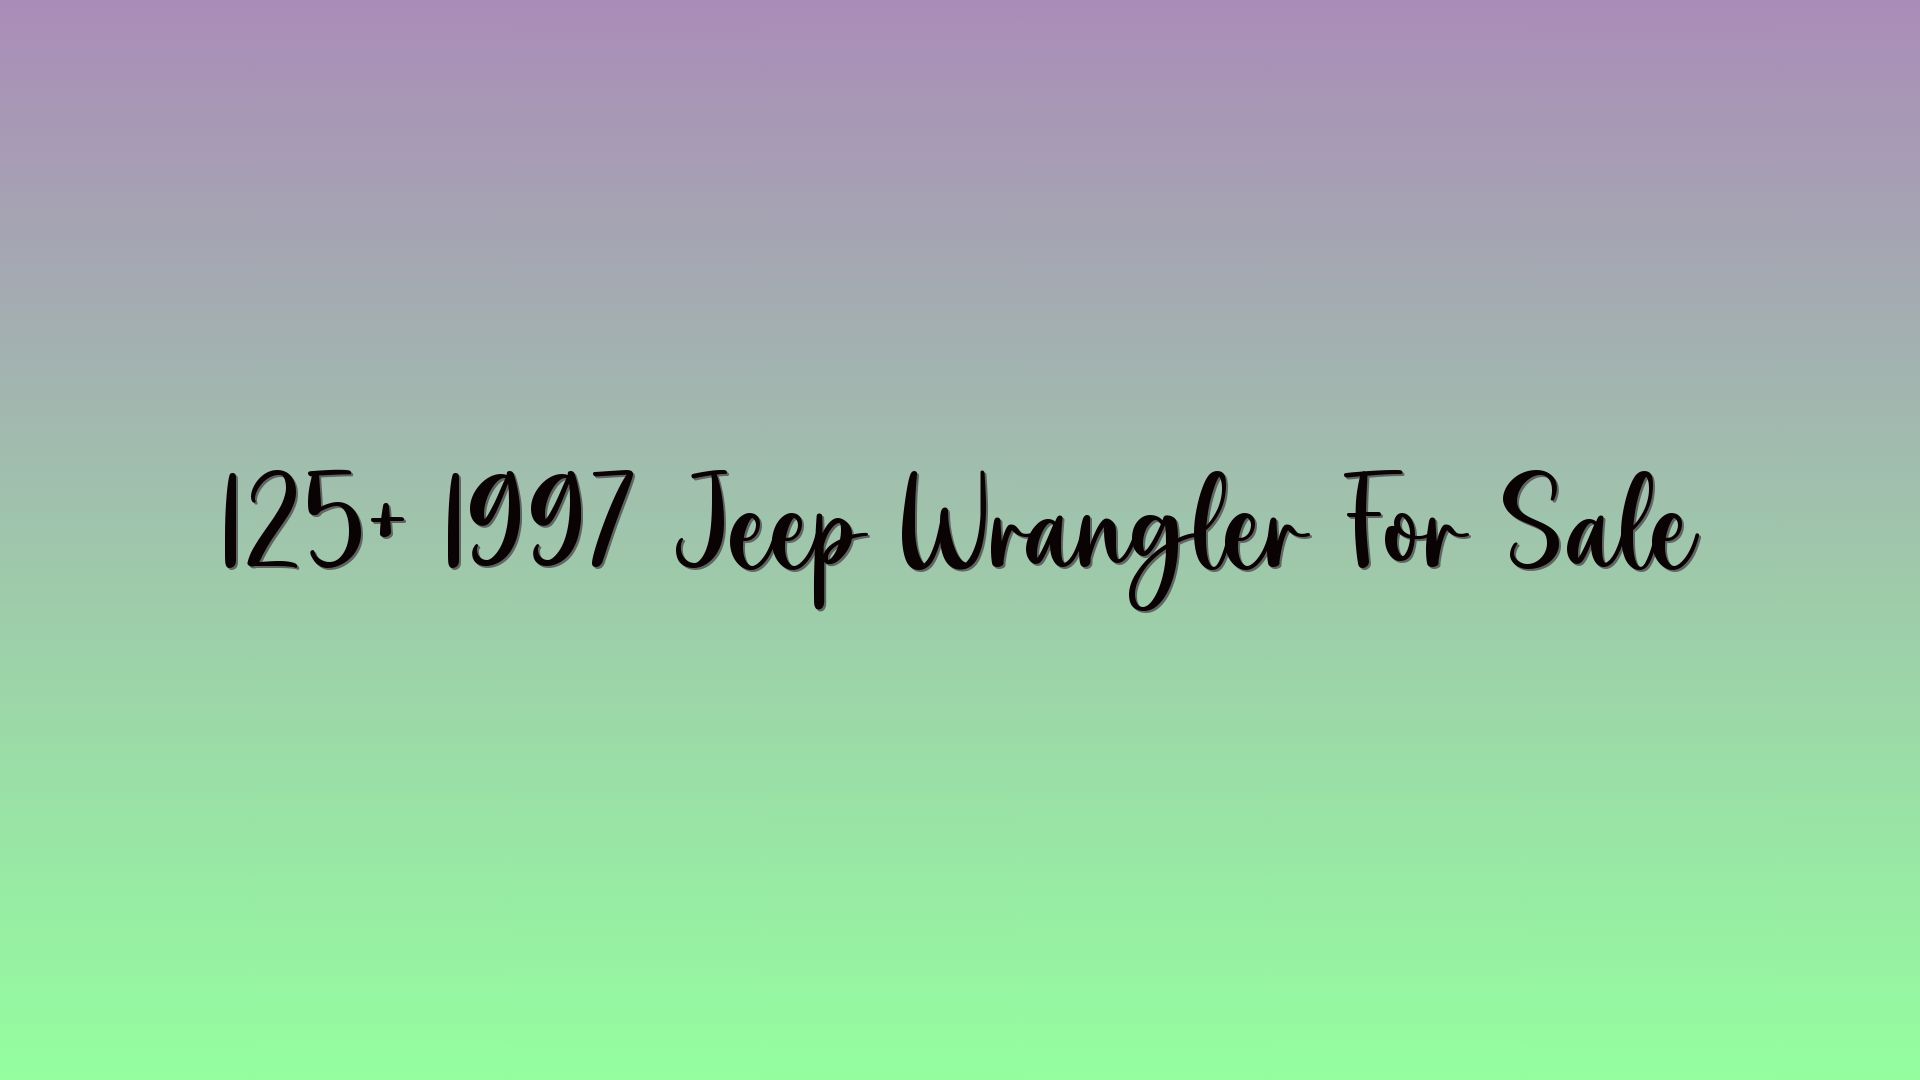 125+ 1997 Jeep Wrangler For Sale